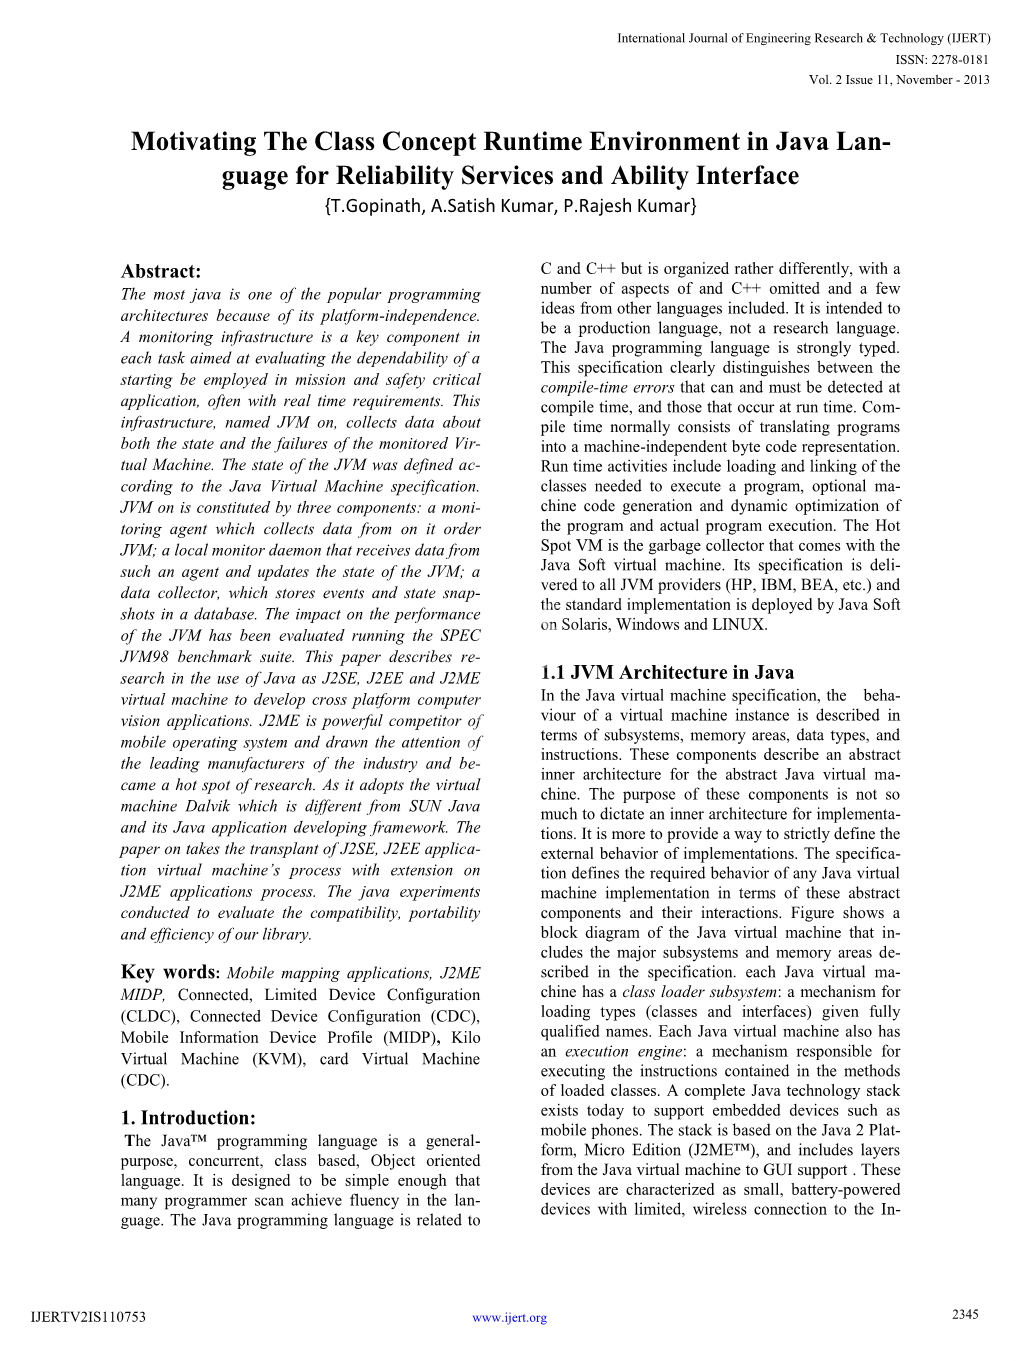 Motivating the Class Concept Runtime Environment in Java Lan- Guage for Reliability Services and Ability Interface {T.Gopinath, A.Satish Kumar, P.Rajesh Kumar}